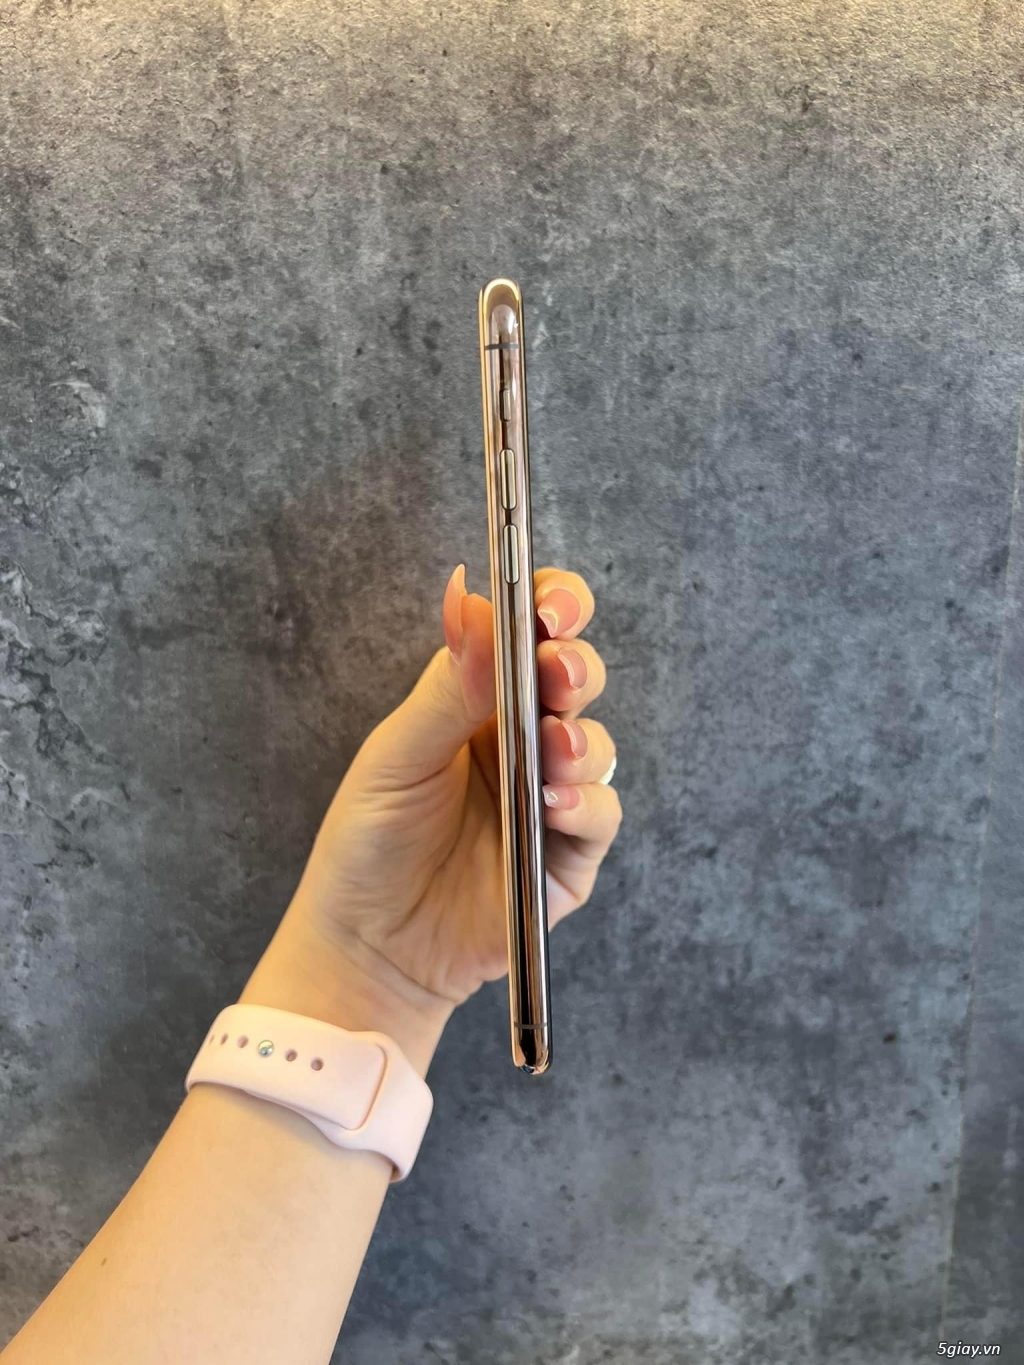 Iphone 11promax 64G Gold giá tốt 5giay.vn - 4